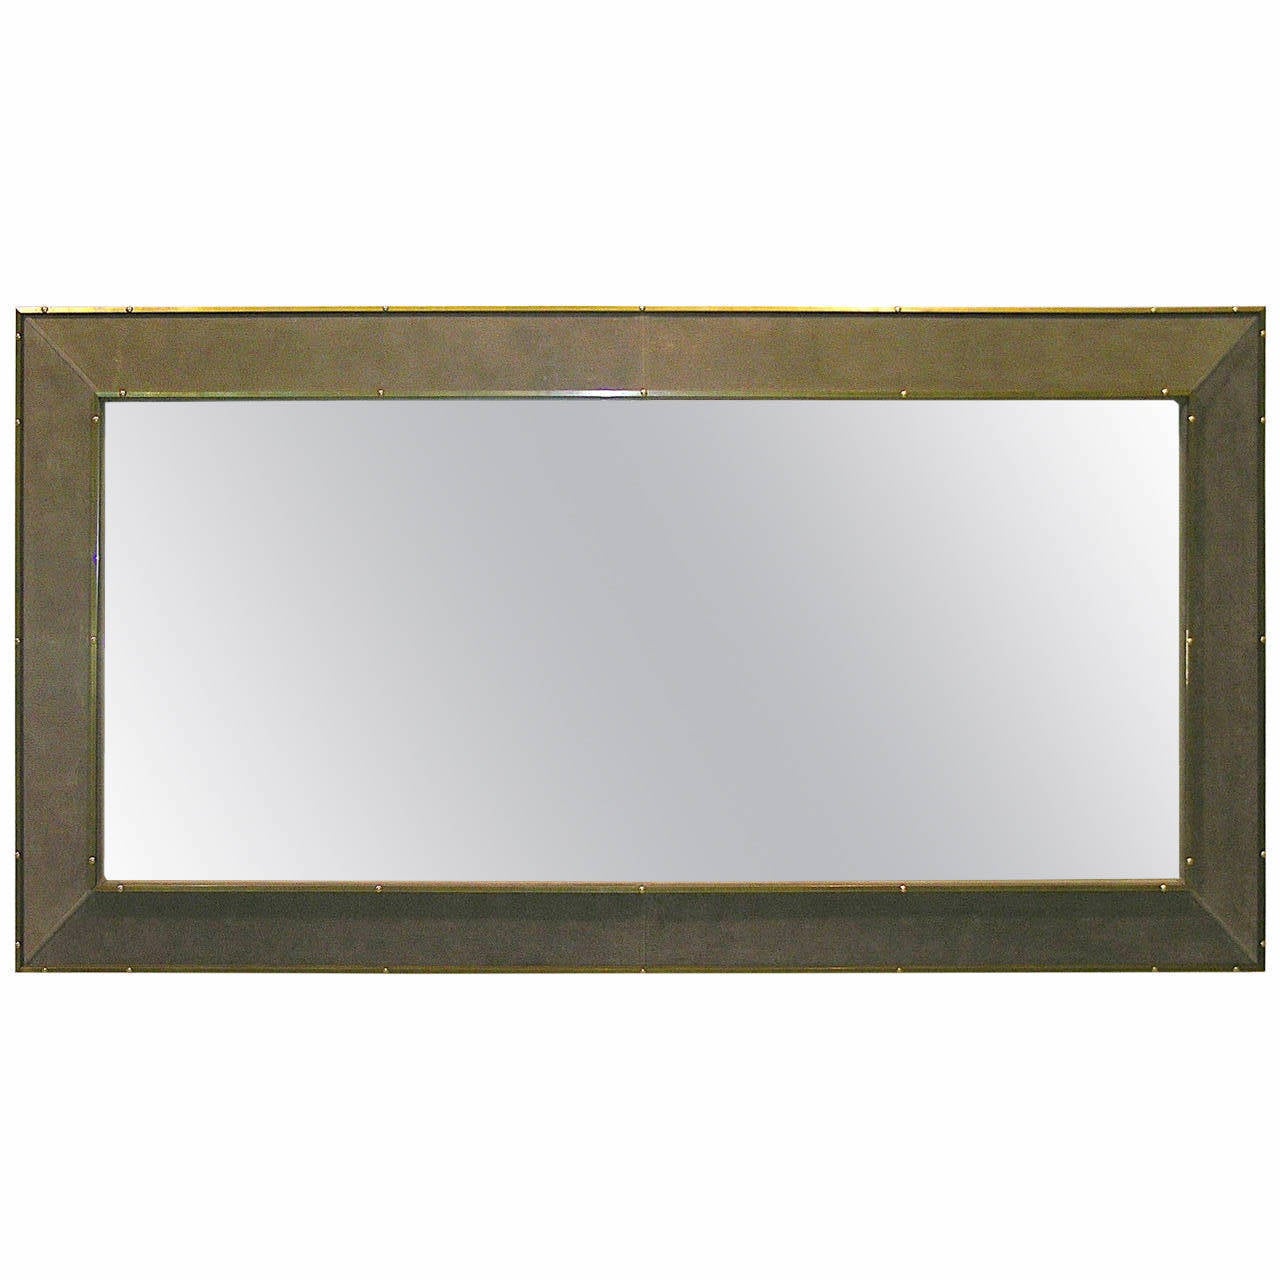 1970s one of a kind Italian floor mirror by Smania covered in an original warm grey suede customized for the previous owner with handcrafted bronze edging decorated with studs. Great design for the projecting frame, high quality of craftsmanship and